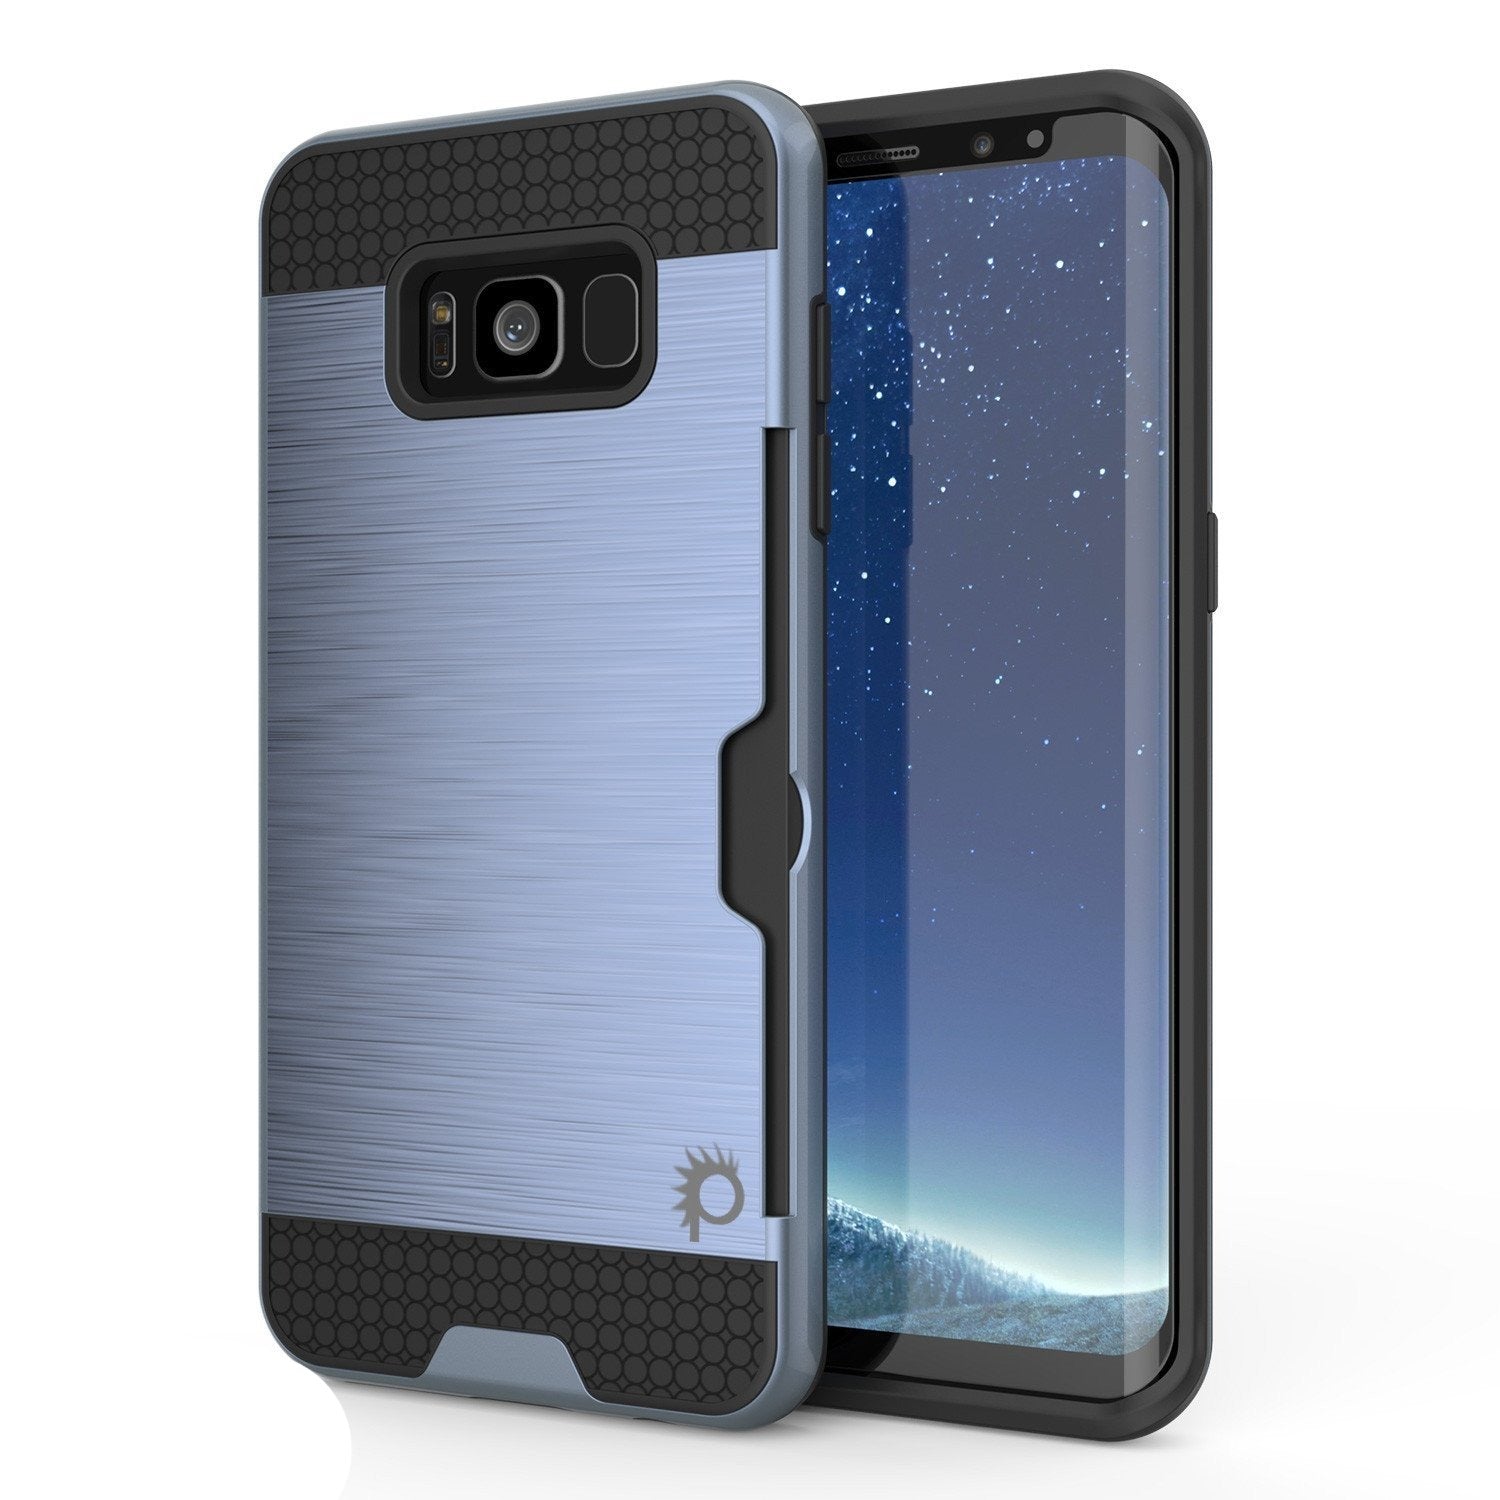 Galaxy S8 Case, PUNKcase [SLOT Series] [Slim Fit] Dual-Layer Armor Cover w/Integrated Anti-Shock System, Credit Card Slot & PUNKSHIELD Screen Protector for Samsung Galaxy S8[Navy]